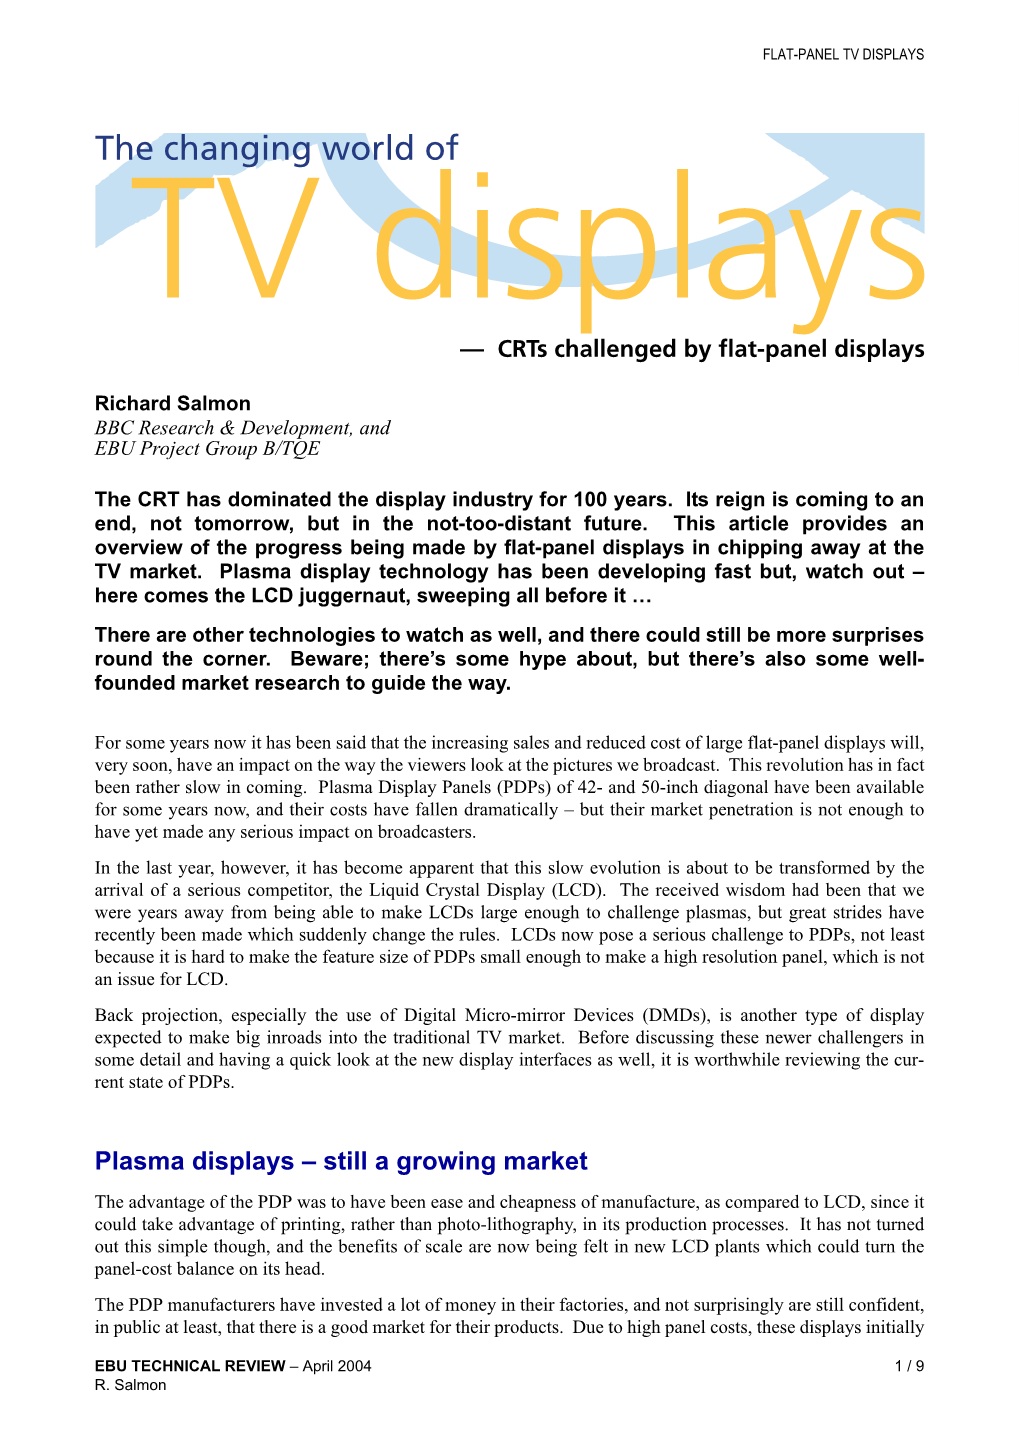 Crts Challenged by Flat-Panel Displays